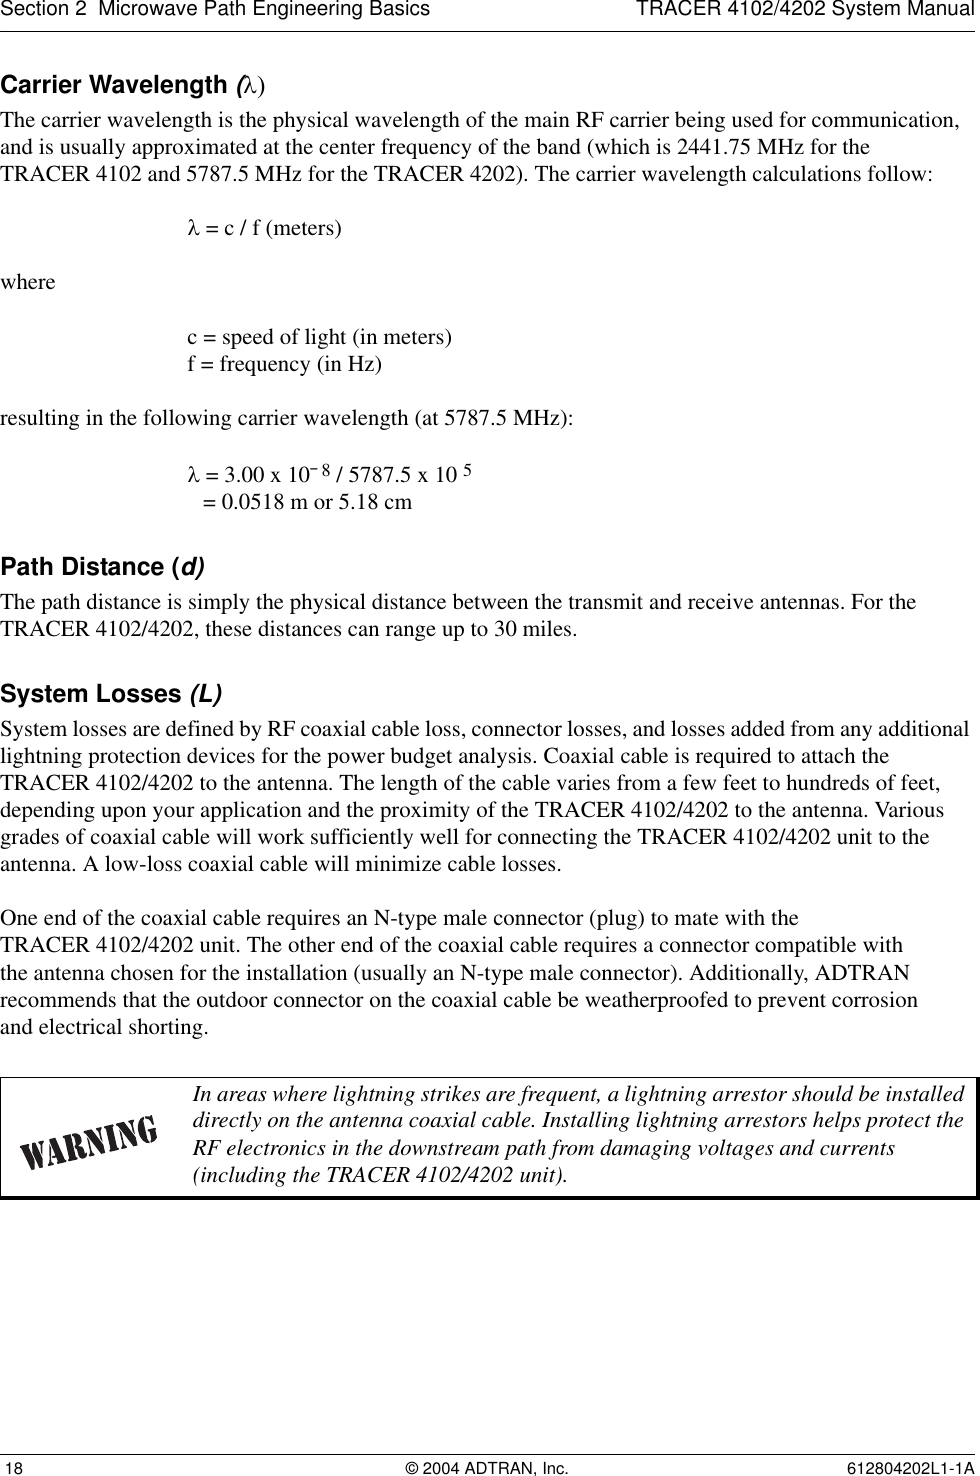 Section 2  Microwave Path Engineering Basics TRACER 4102/4202 System Manual 18 © 2004 ADTRAN, Inc. 612804202L1-1ACarrier Wavelength (λ)The carrier wavelength is the physical wavelength of the main RF carrier being used for communication, and is usually approximated at the center frequency of the band (which is 2441.75 MHz for theTRACER 4102 and 5787.5 MHz for the TRACER 4202). The carrier wavelength calculations follow:λ = c / f (meters)where c = speed of light (in meters)f = frequency (in Hz)resulting in the following carrier wavelength (at 5787.5 MHz):λ = 3.00 x 10¯8 / 5787.5 x 10 5 = 0.0518 m or 5.18 cmPath Distance (d)The path distance is simply the physical distance between the transmit and receive antennas. For the TRACER 4102/4202, these distances can range up to 30 miles. System Losses (L)System losses are defined by RF coaxial cable loss, connector losses, and losses added from any additional lightning protection devices for the power budget analysis. Coaxial cable is required to attach the TRACER 4102/4202 to the antenna. The length of the cable varies from a few feet to hundreds of feet, depending upon your application and the proximity of the TRACER 4102/4202 to the antenna. Various grades of coaxial cable will work sufficiently well for connecting the TRACER 4102/4202 unit to the antenna. A low-loss coaxial cable will minimize cable losses.One end of the coaxial cable requires an N-type male connector (plug) to mate with theTRACER 4102/4202 unit. The other end of the coaxial cable requires a connector compatible withthe antenna chosen for the installation (usually an N-type male connector). Additionally, ADTRAN recommends that the outdoor connector on the coaxial cable be weatherproofed to prevent corrosionand electrical shorting.In areas where lightning strikes are frequent, a lightning arrestor should be installed directly on the antenna coaxial cable. Installing lightning arrestors helps protect the RF electronics in the downstream path from damaging voltages and currents (including the TRACER 4102/4202 unit).